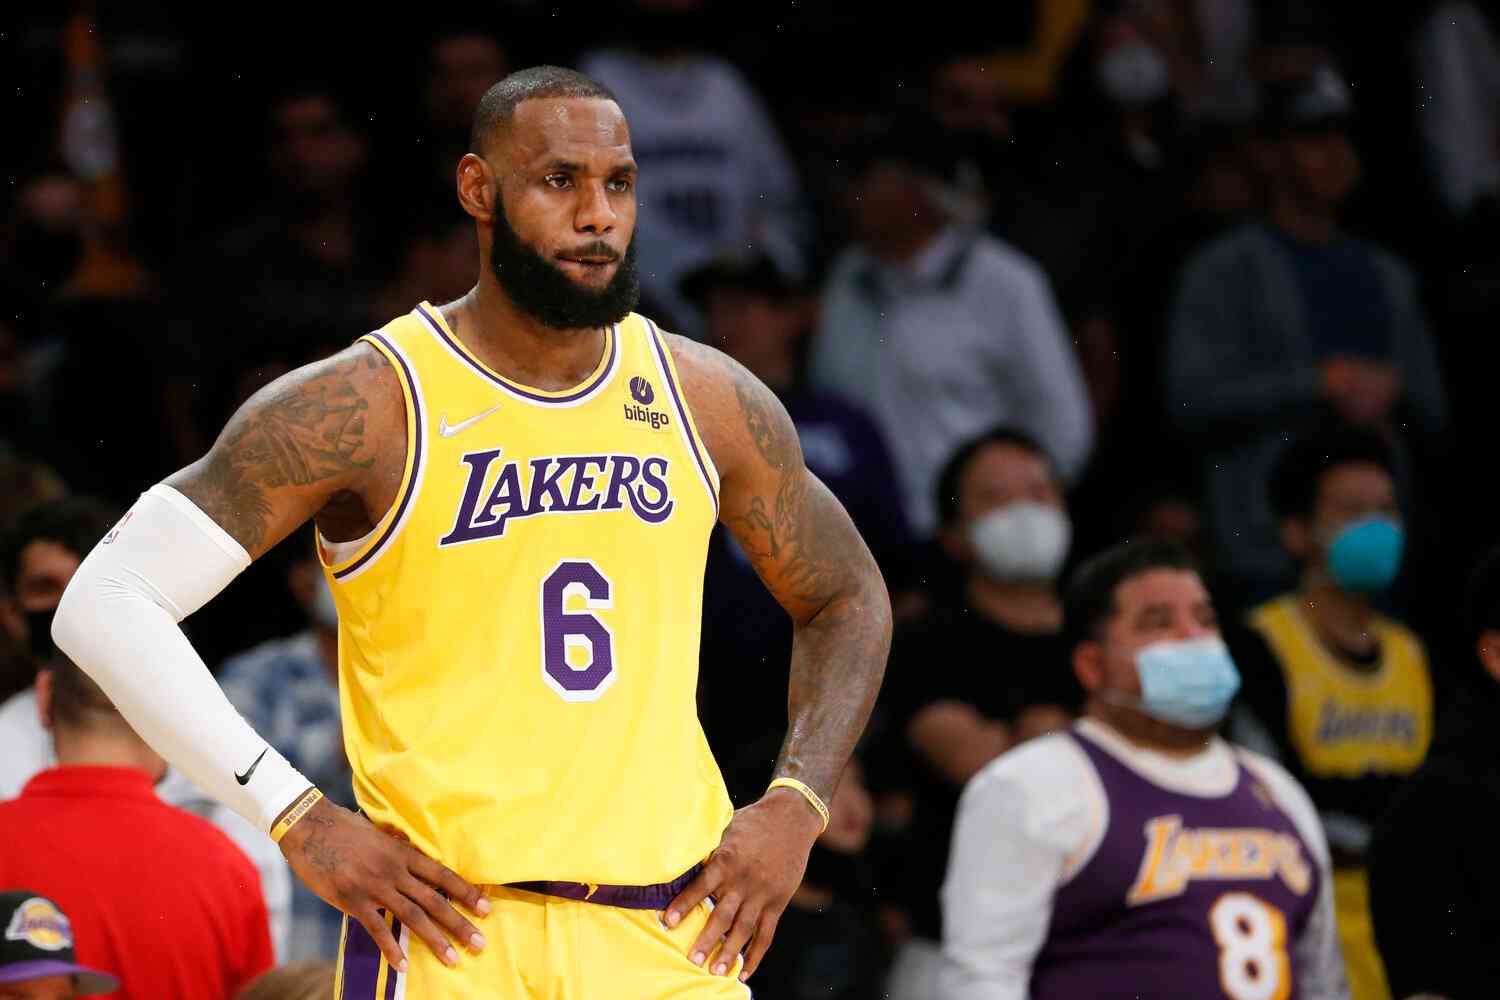 LeBron James has a steely work ethic that can turn him into an NBA champion | Bill Foote